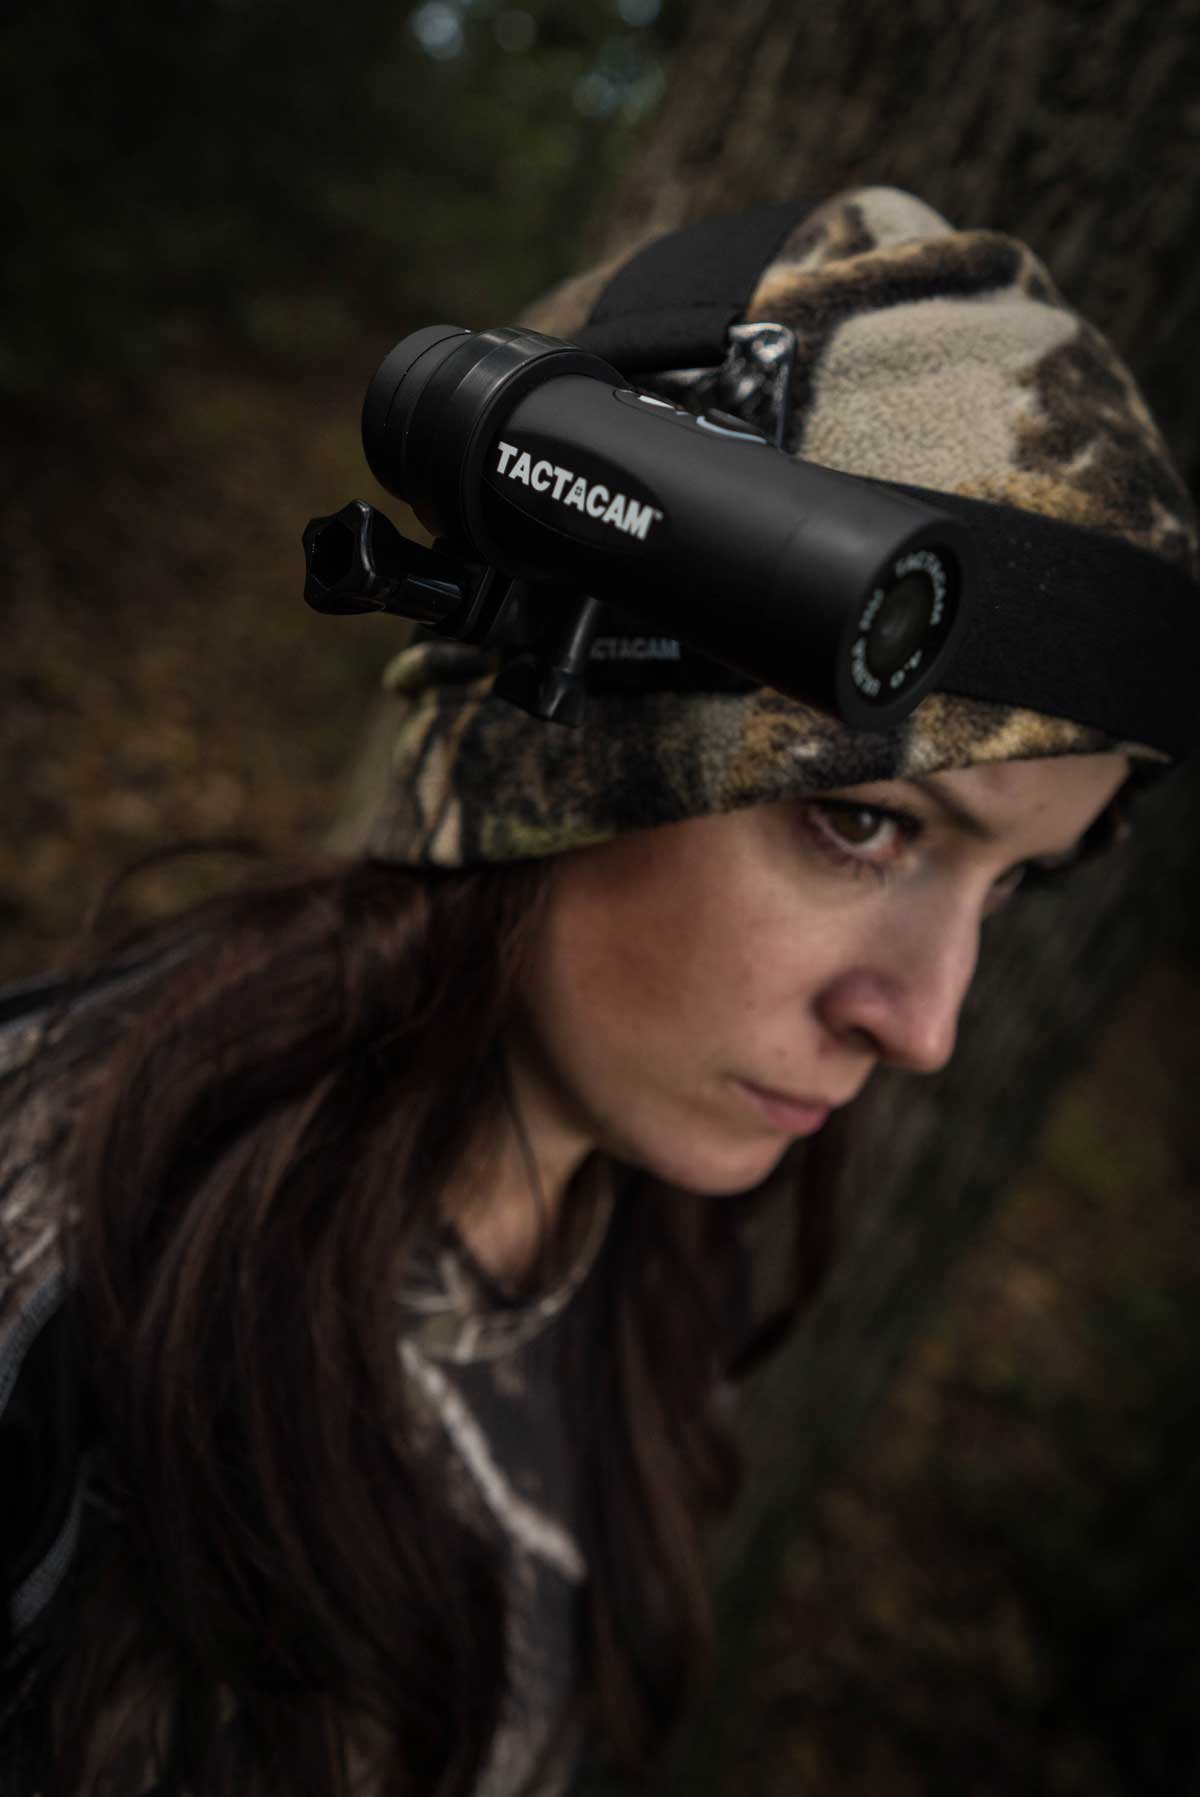 The head mount allows hunters to capture the action in hands-free form. (Photo: Tactacam)